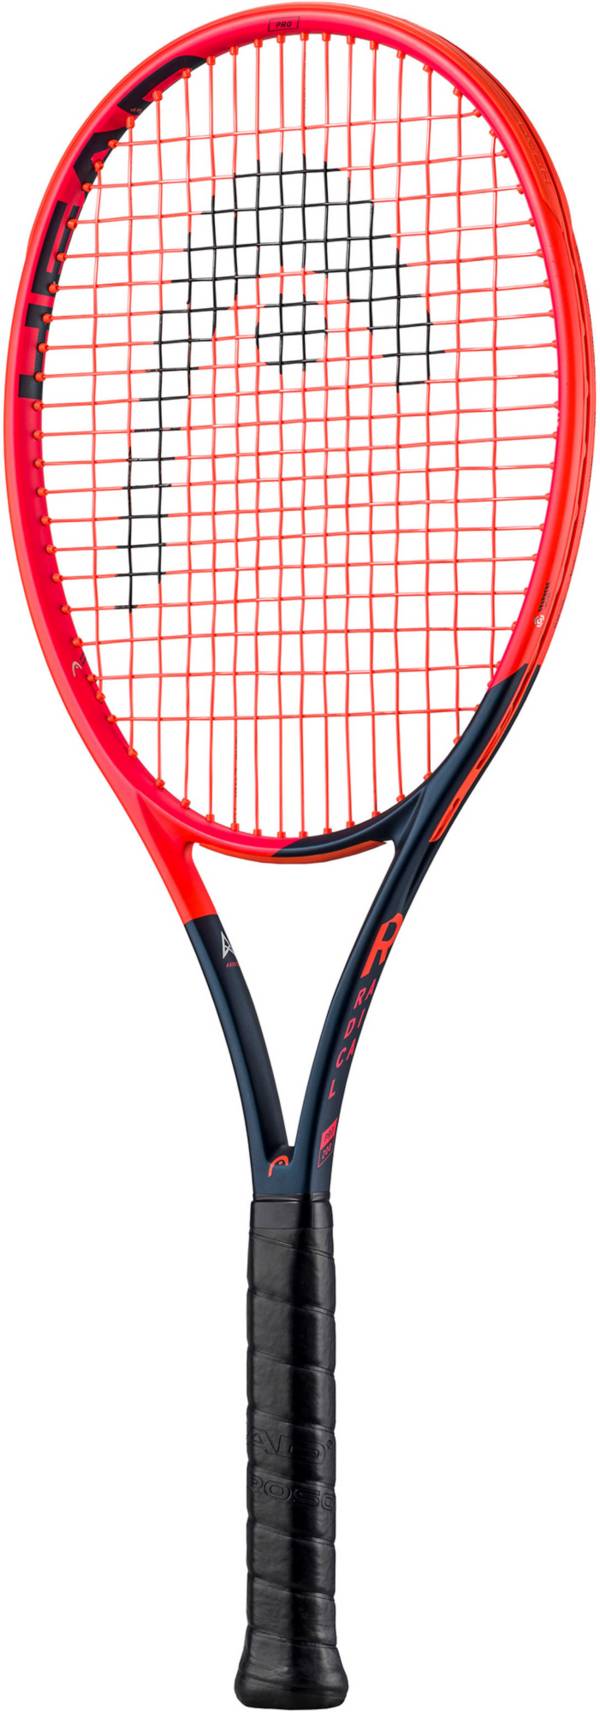 Head Radical Pro 2023 Tennis Racquet - Unstrung product image